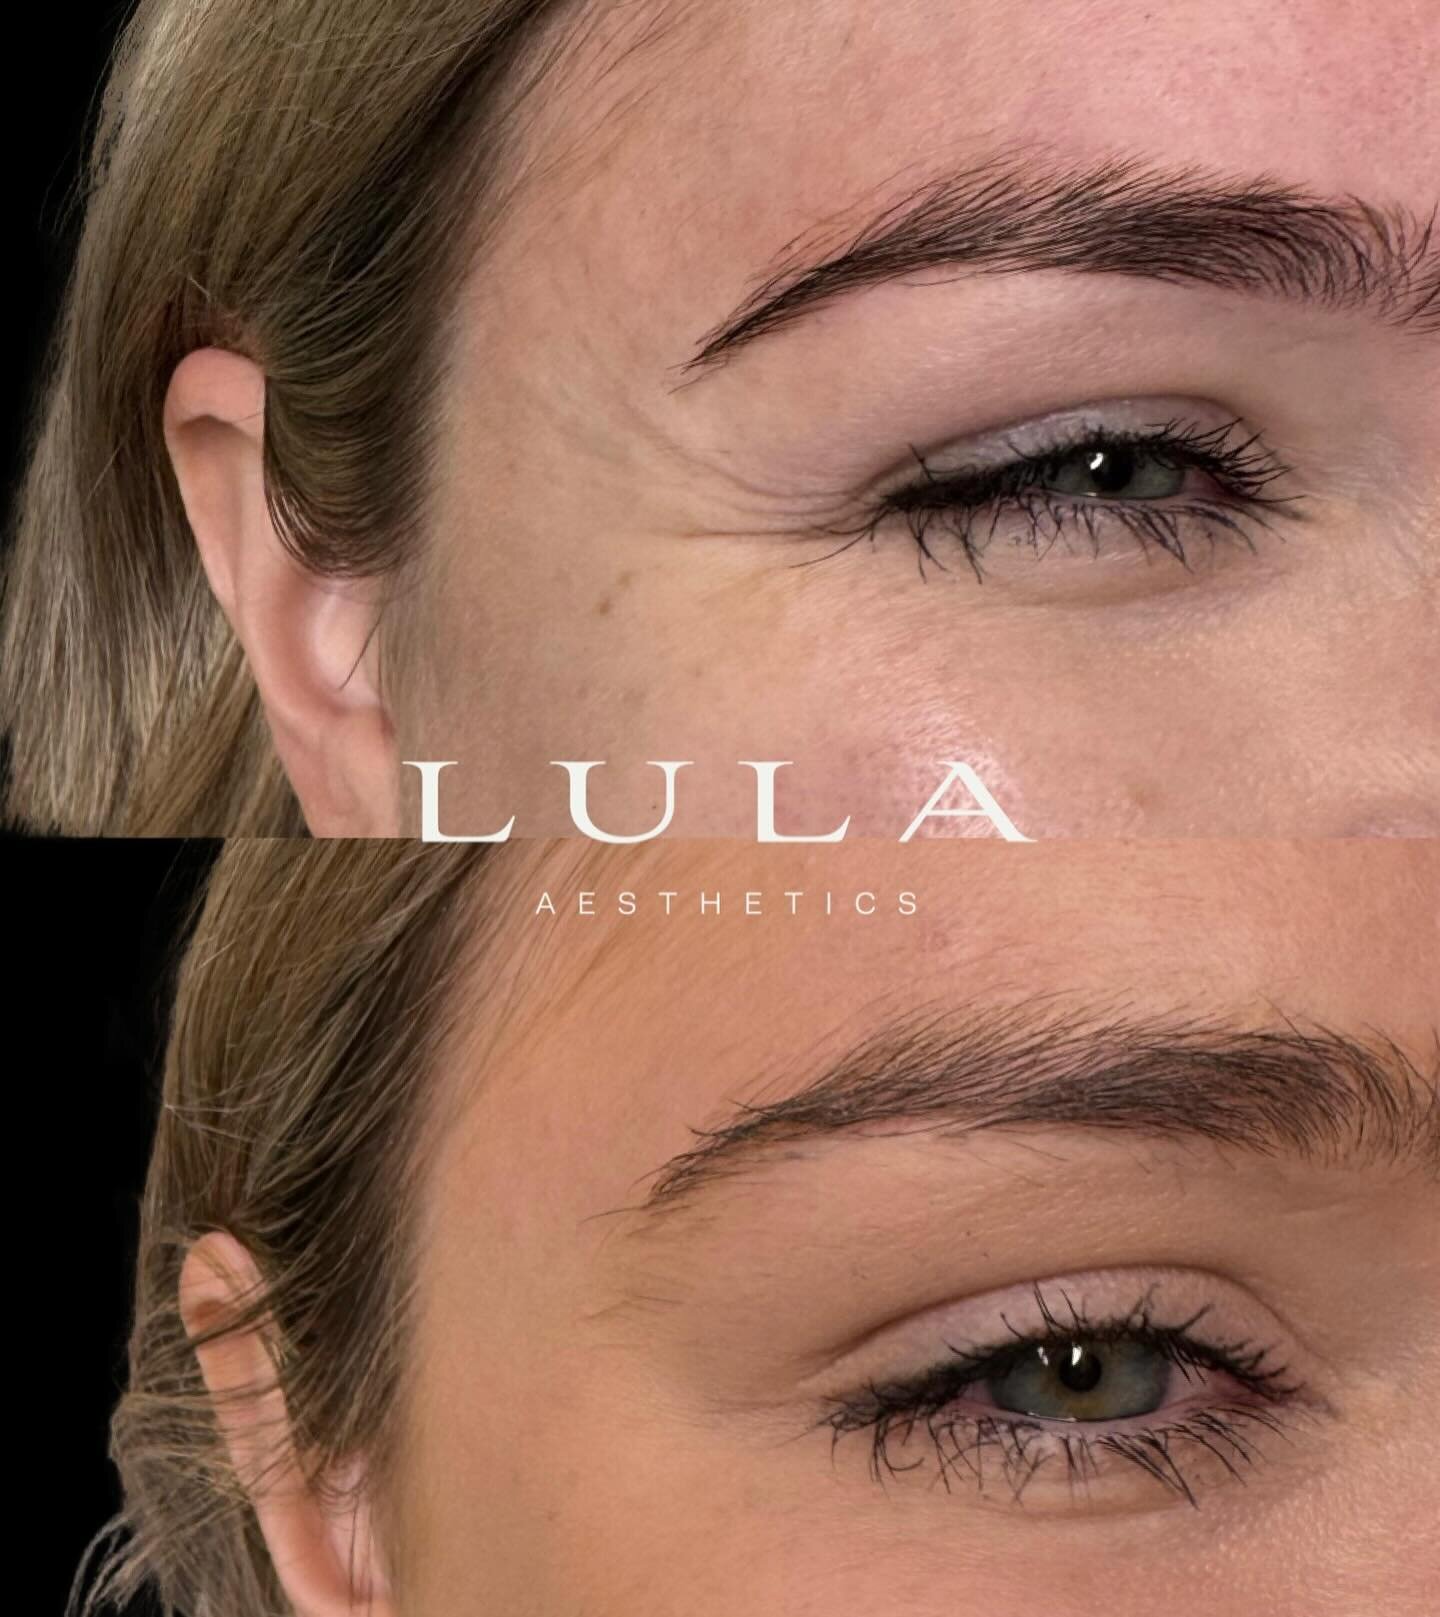 Mads had an insane first day back Wednesday! 

Reviewing all her clients from last year, seeing results like this and hearing all your wonderful feedback is exactly why she loves the job! 

Antiwrinkle results like this 👏🏻 

Forehead, frown &amp; c